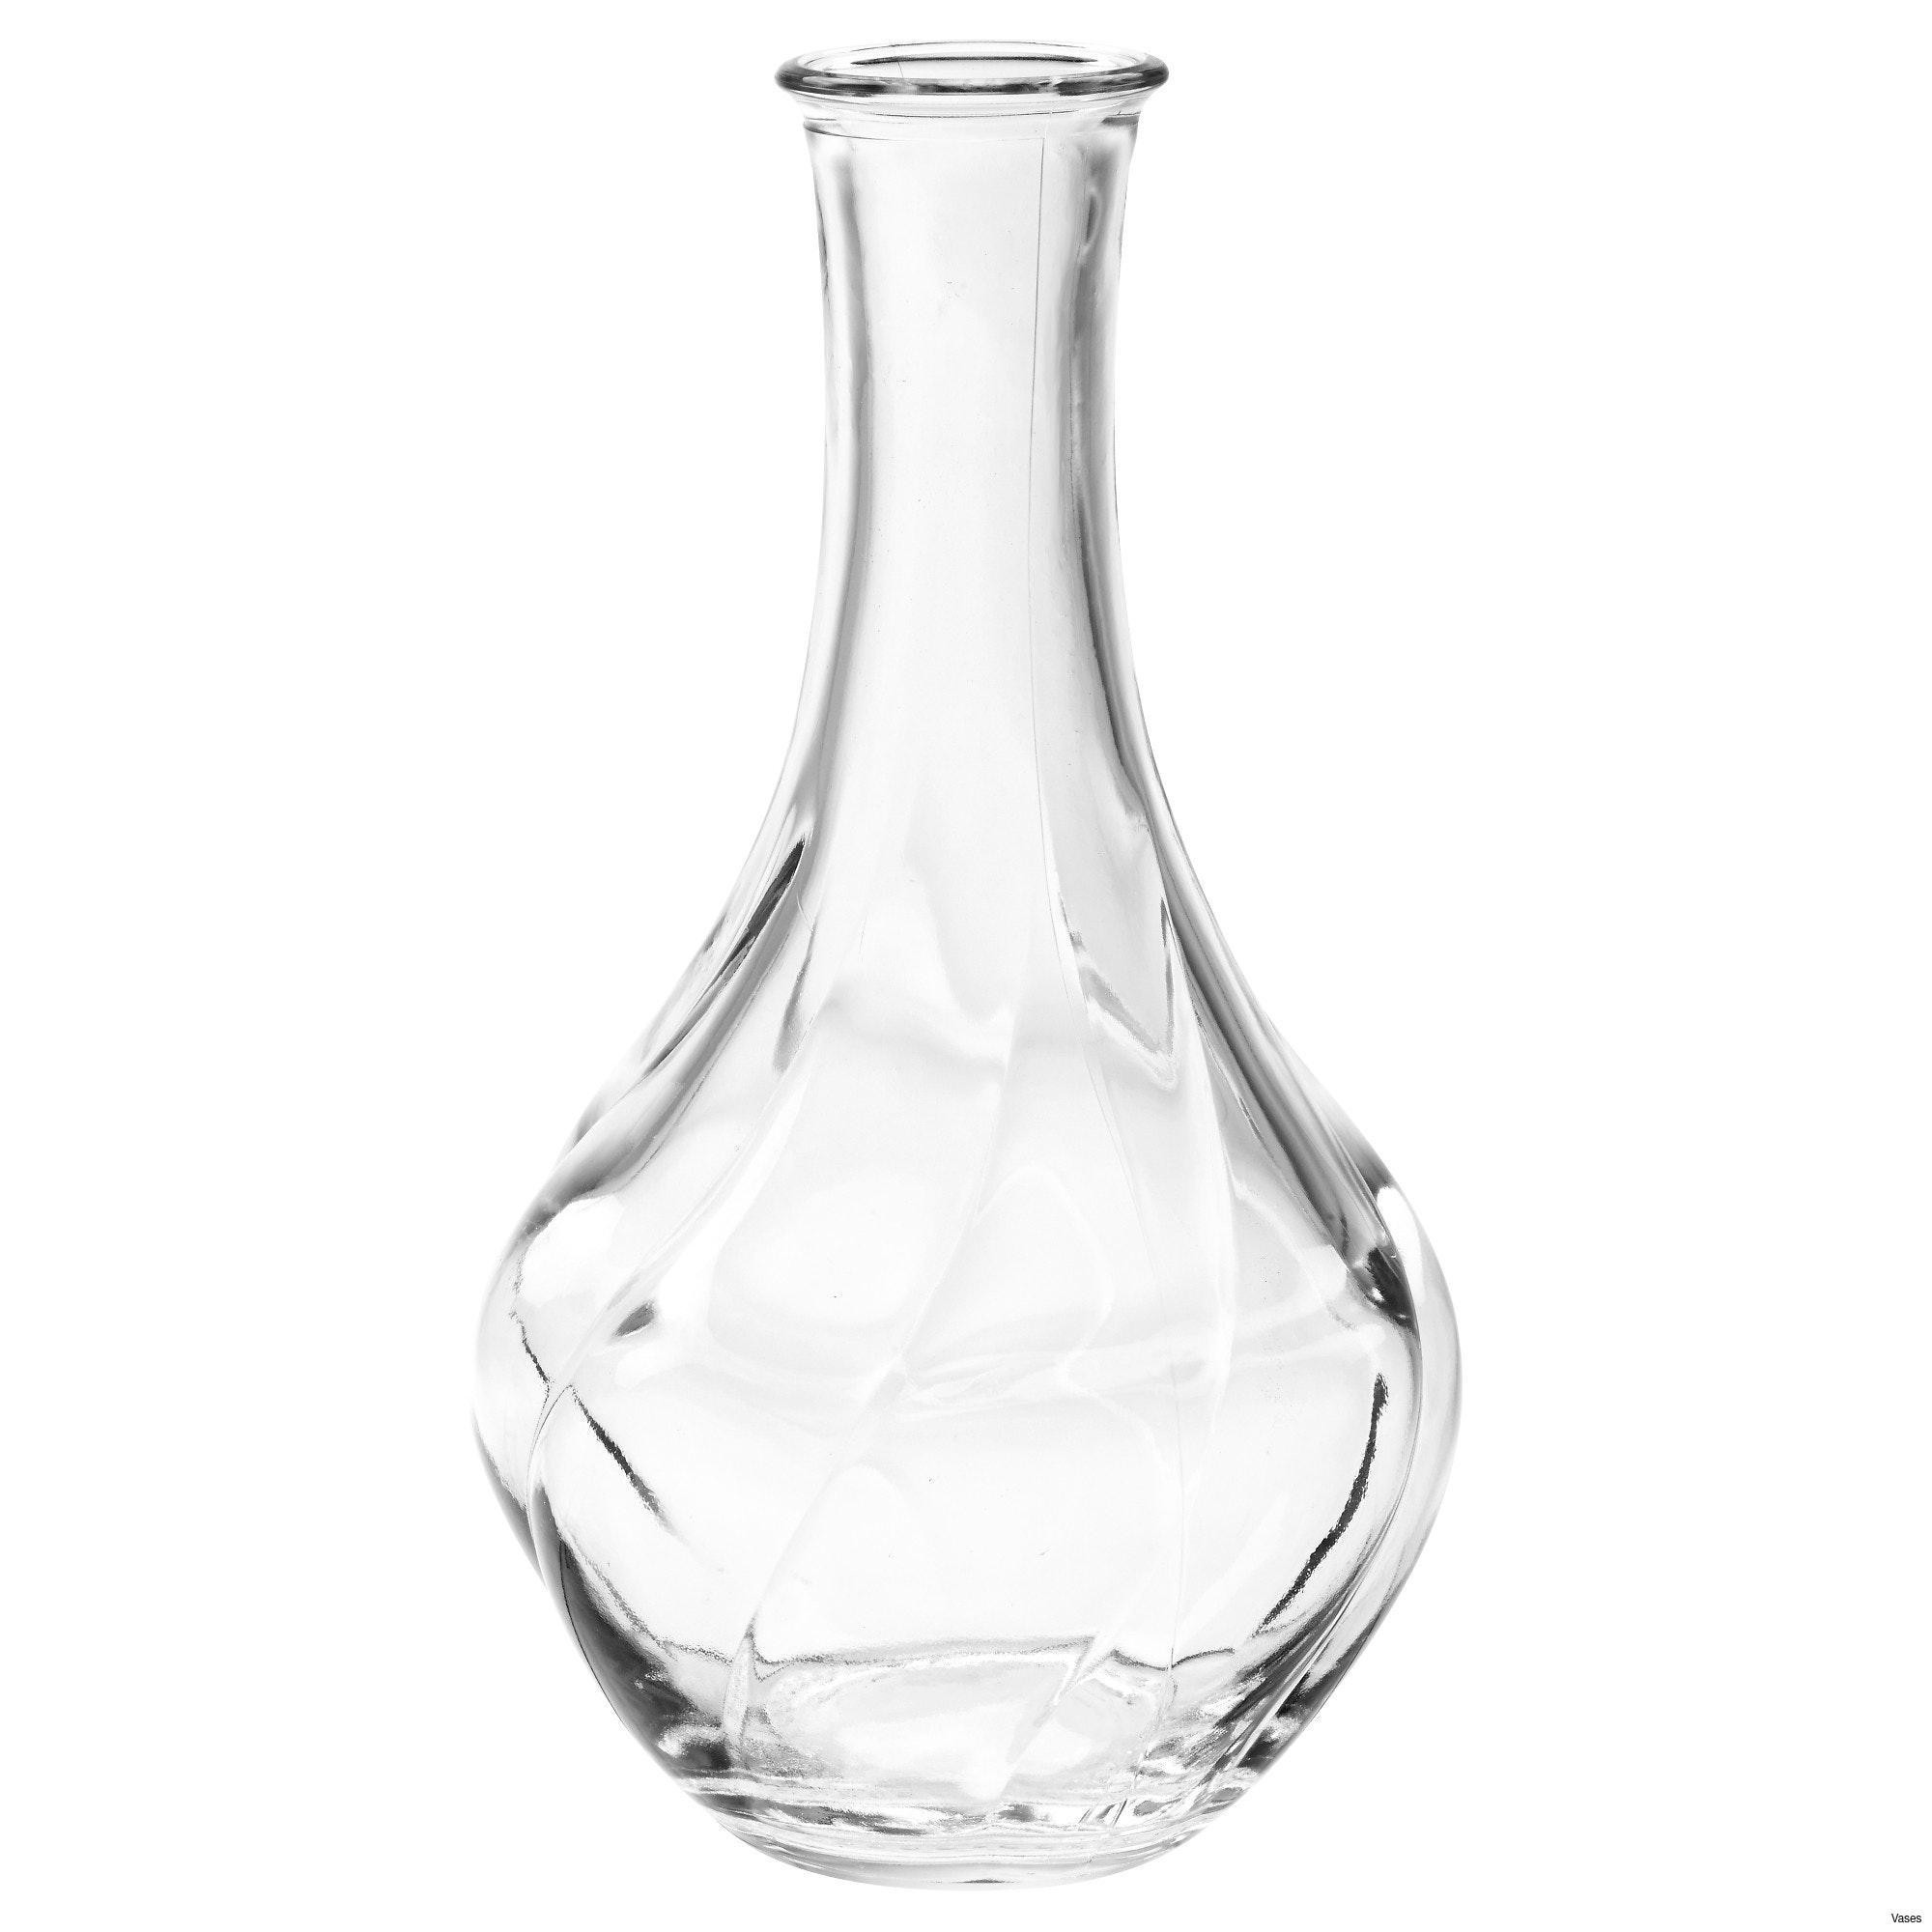 26 Lovely White Milk Jug Vase 2024 free download white milk jug vase of large glass vases gallery living room glass vases fresh clear vase throughout large glass vases gallery living room glass vases fresh clear vase 0d tags amazing and of